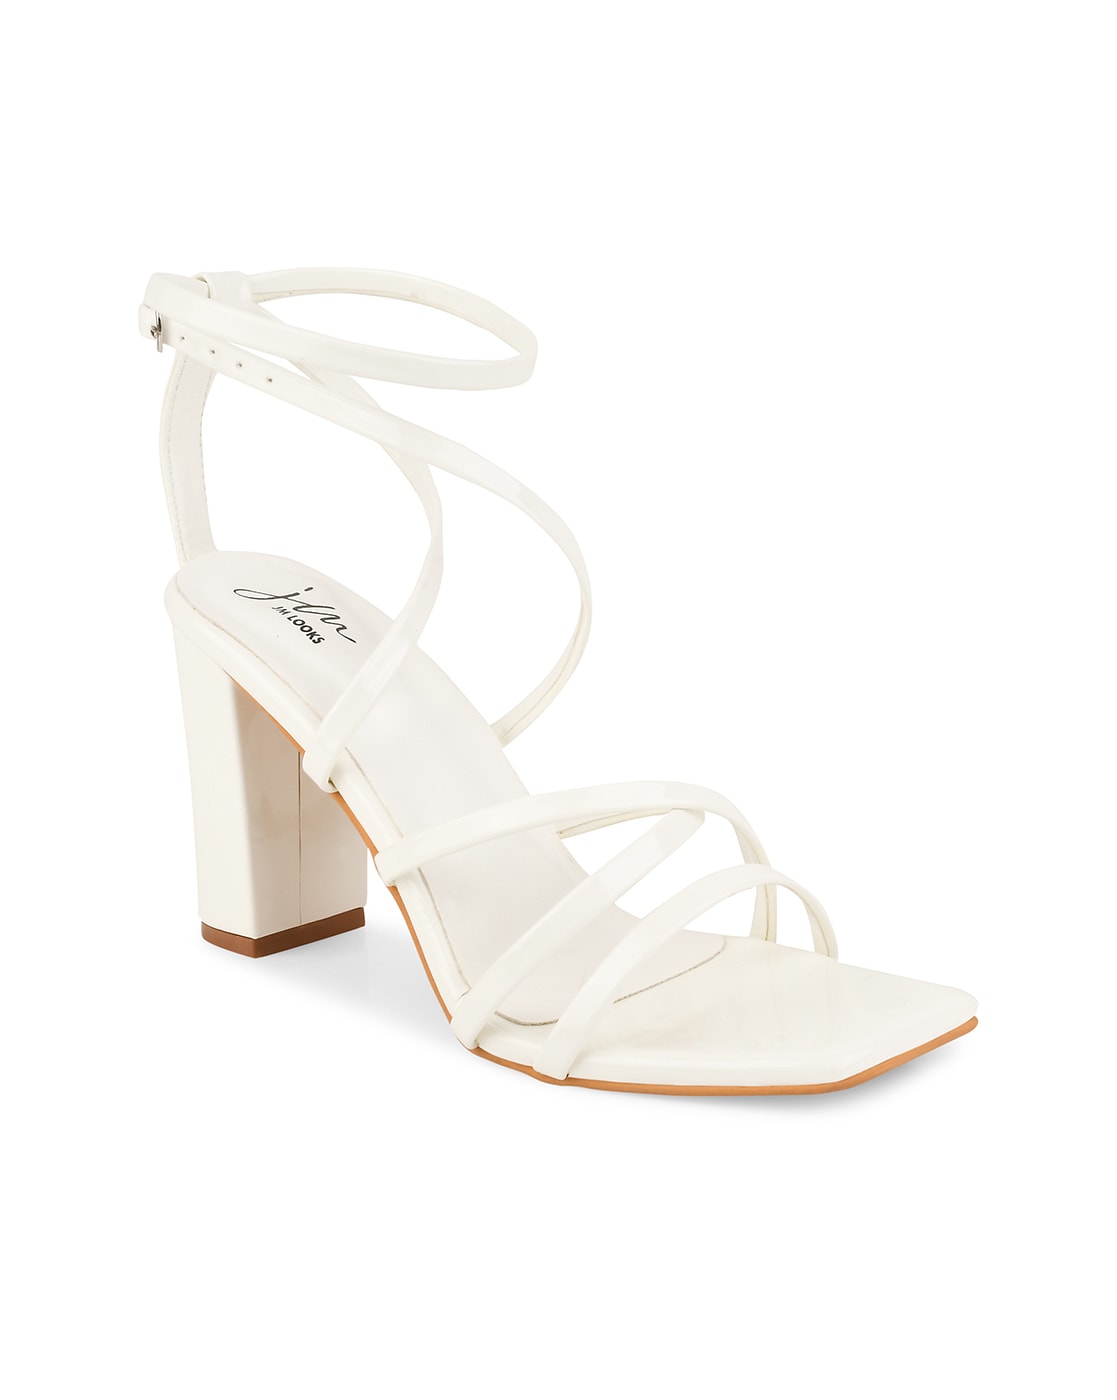 Oriana Lace Up Strappy Heeled Sandals in White - Larena Fashion